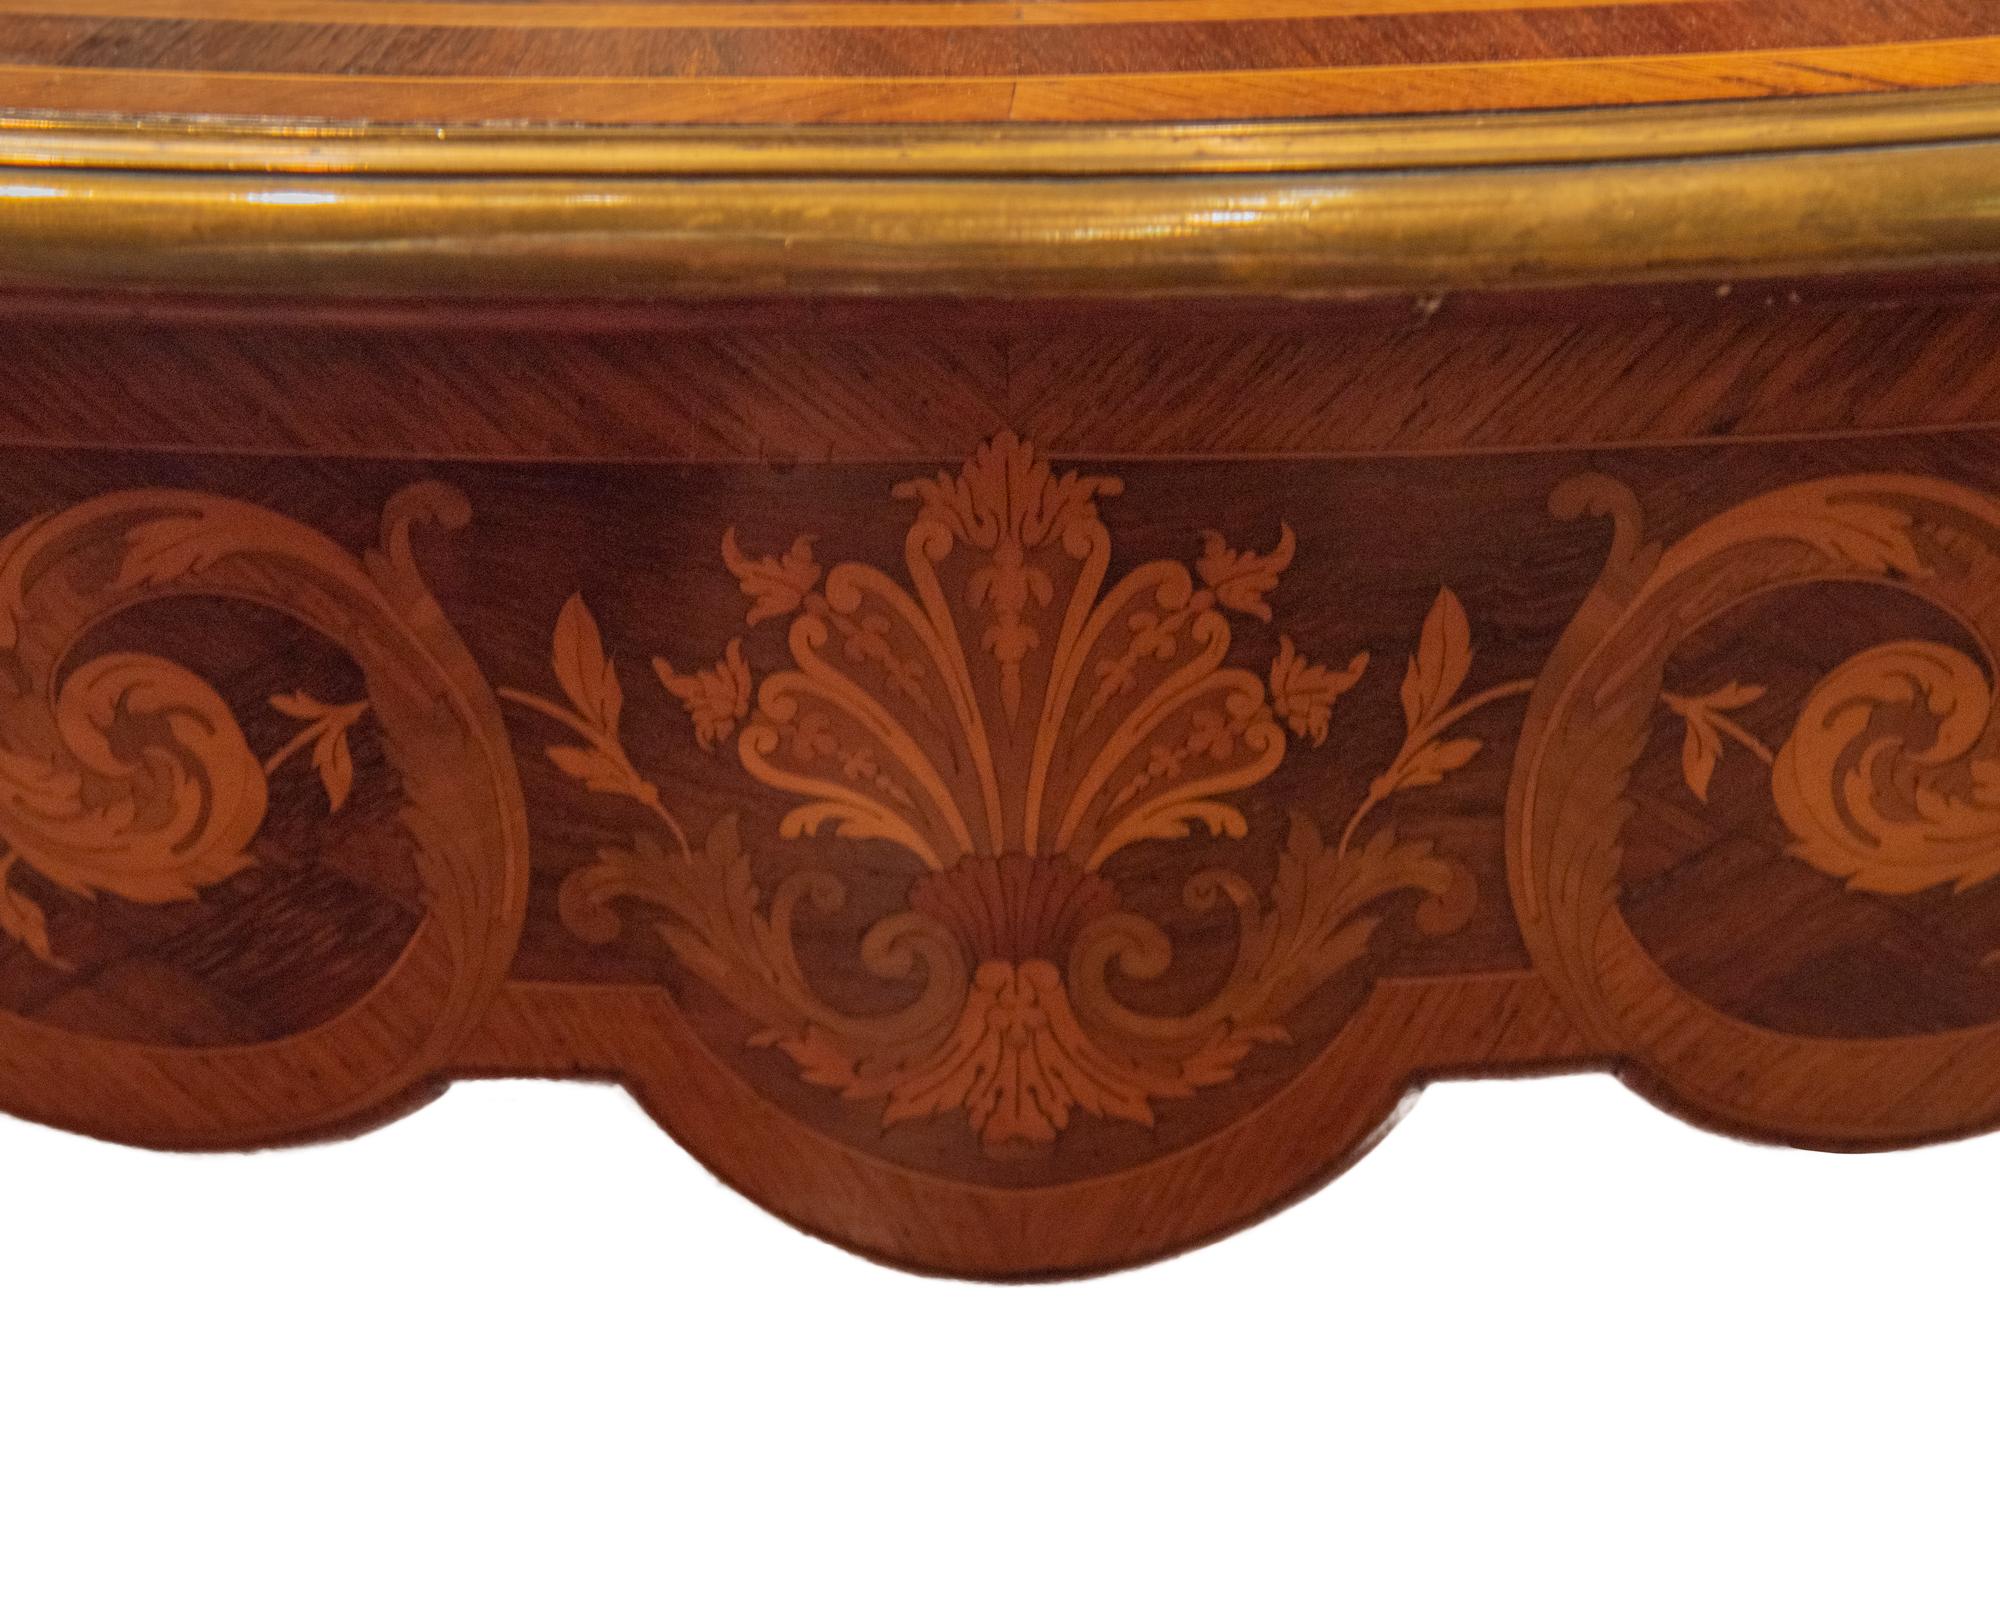 A large French 19th century Louis XV style kingwood, tulipwood and ormolu desk or writing table. The table is raised by slender cabriole legs with foliate ormolu sabots. An ormolu chute leads up each leg to a foliate corner mount. The shaped frieze